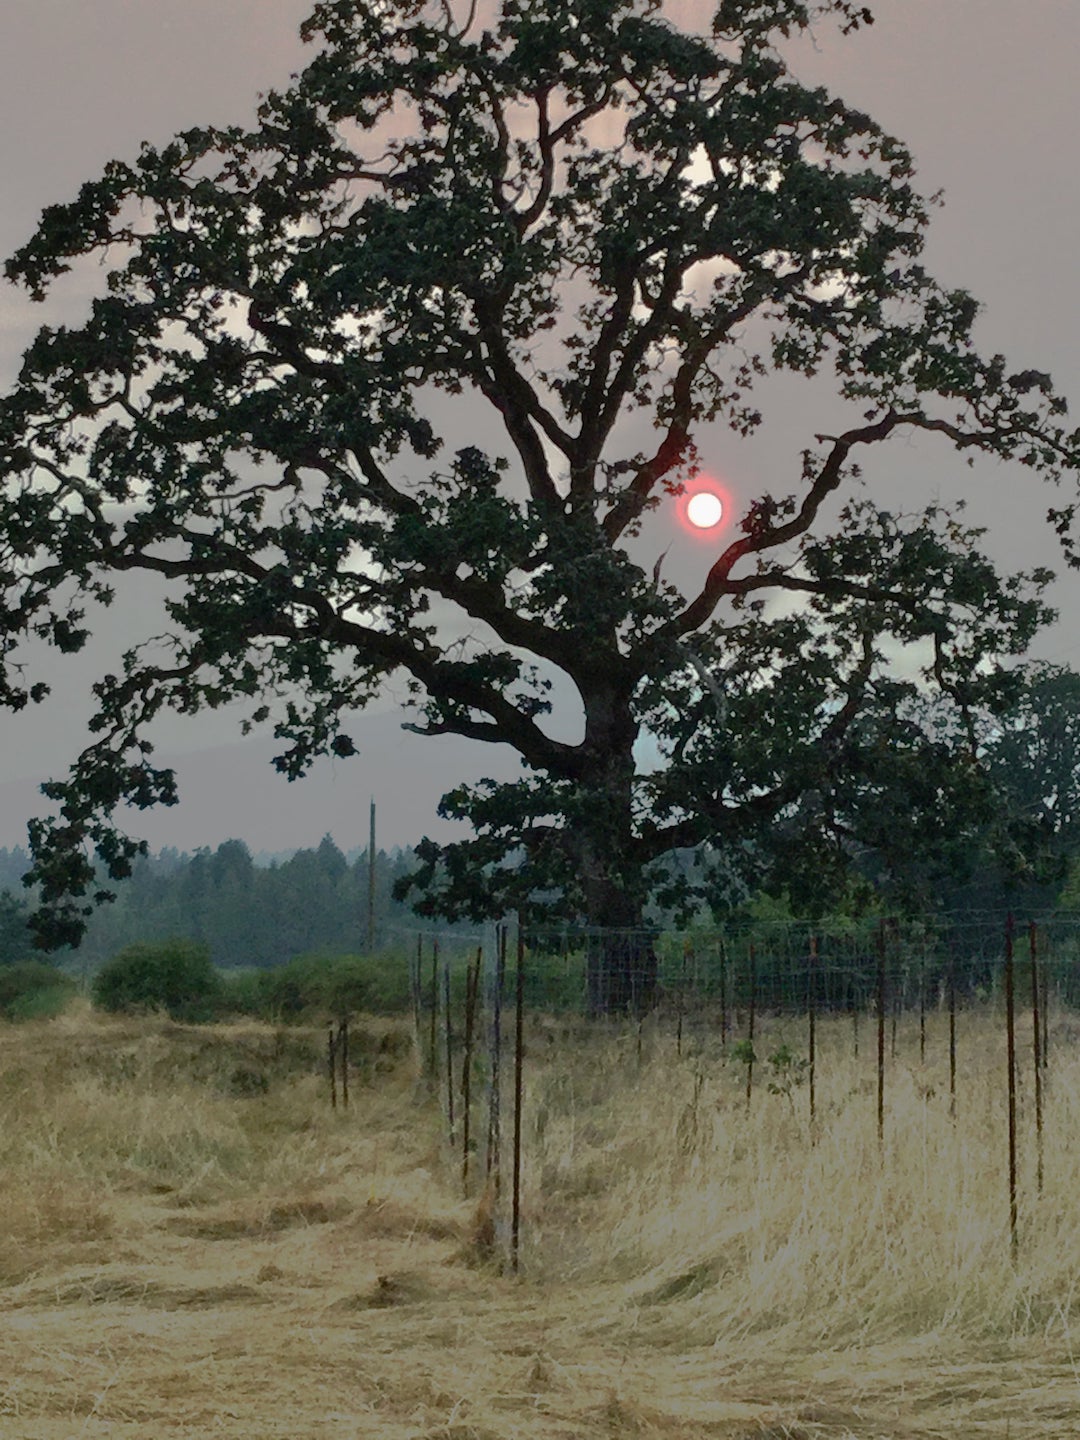 The Nature Conservancy of Canada Sunset in a Garry oak preserve Canada with research plots